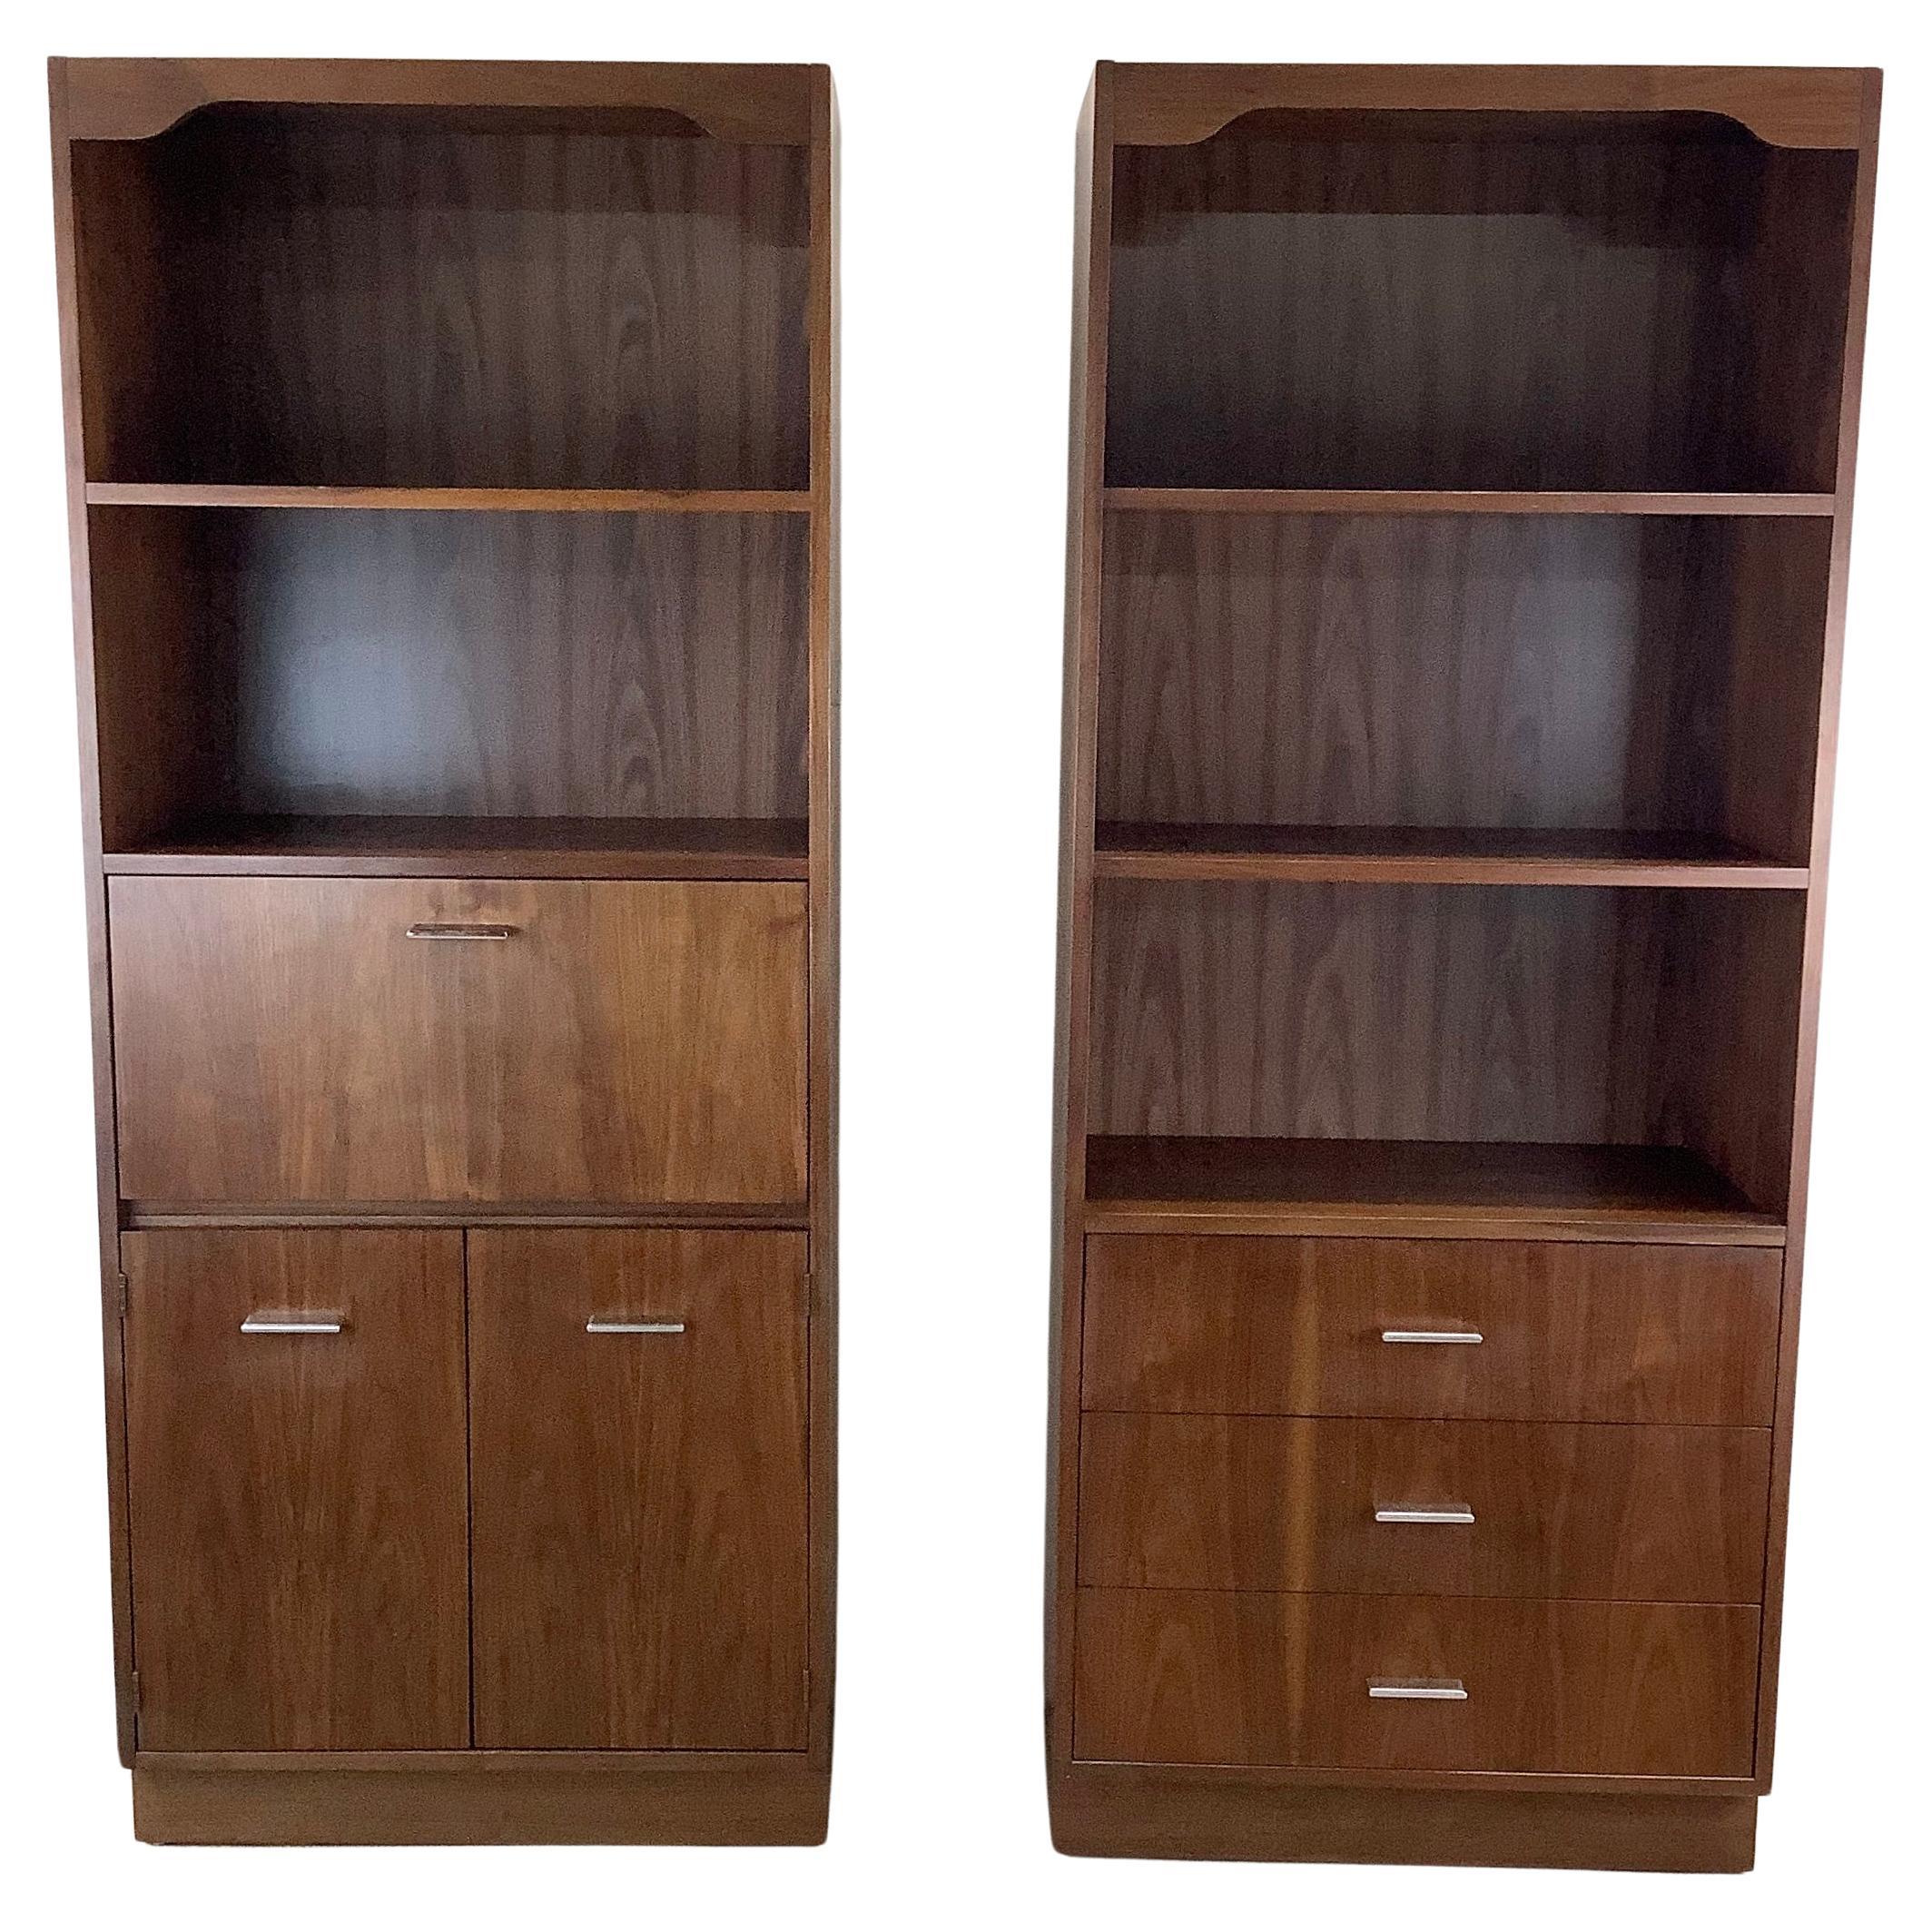 Tall Vintage Bookshelves With Drop Front Cabinet & Drawers For Sale